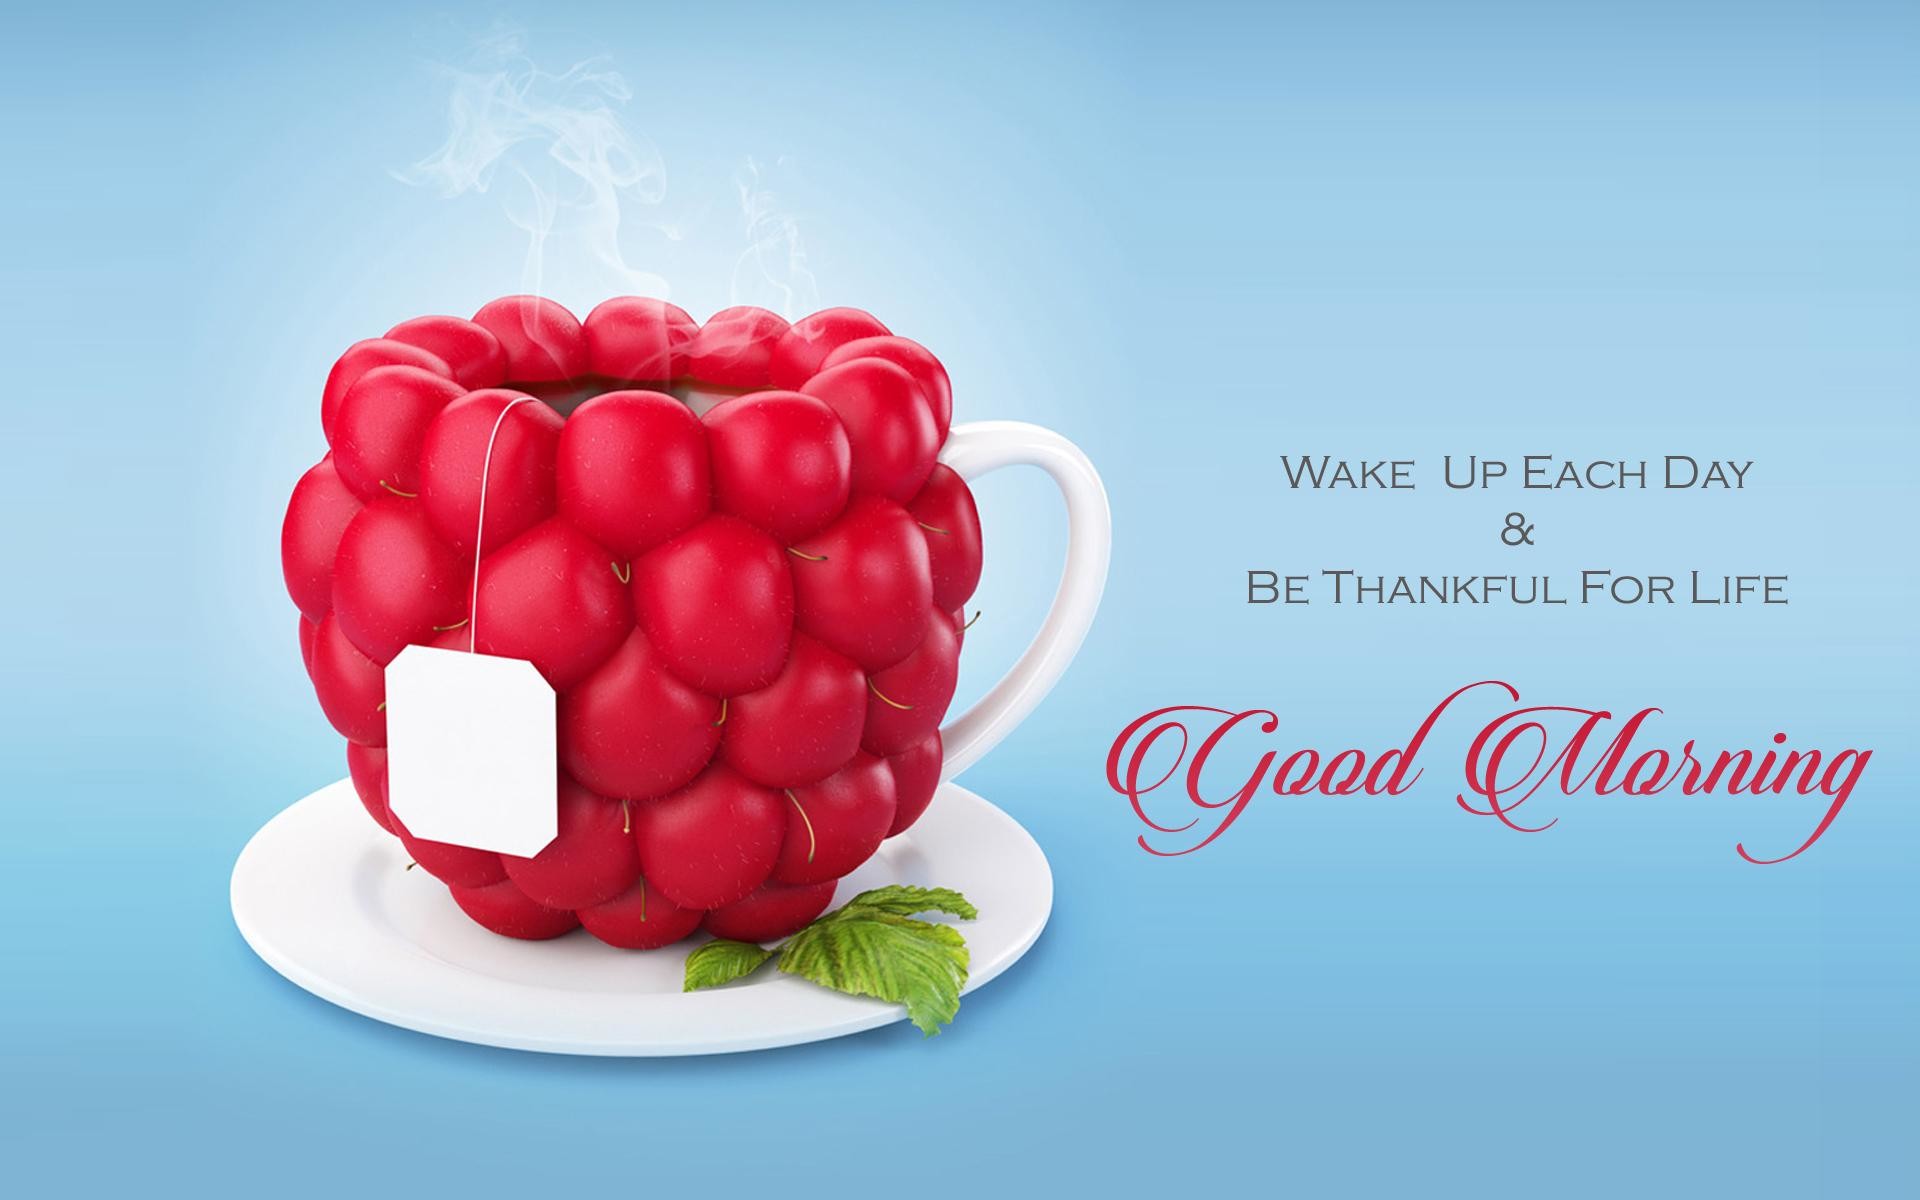 Sweet Morning Wishes Cup Image In Hd Wallpapers - Good Morning Wishes Hd - HD Wallpaper 